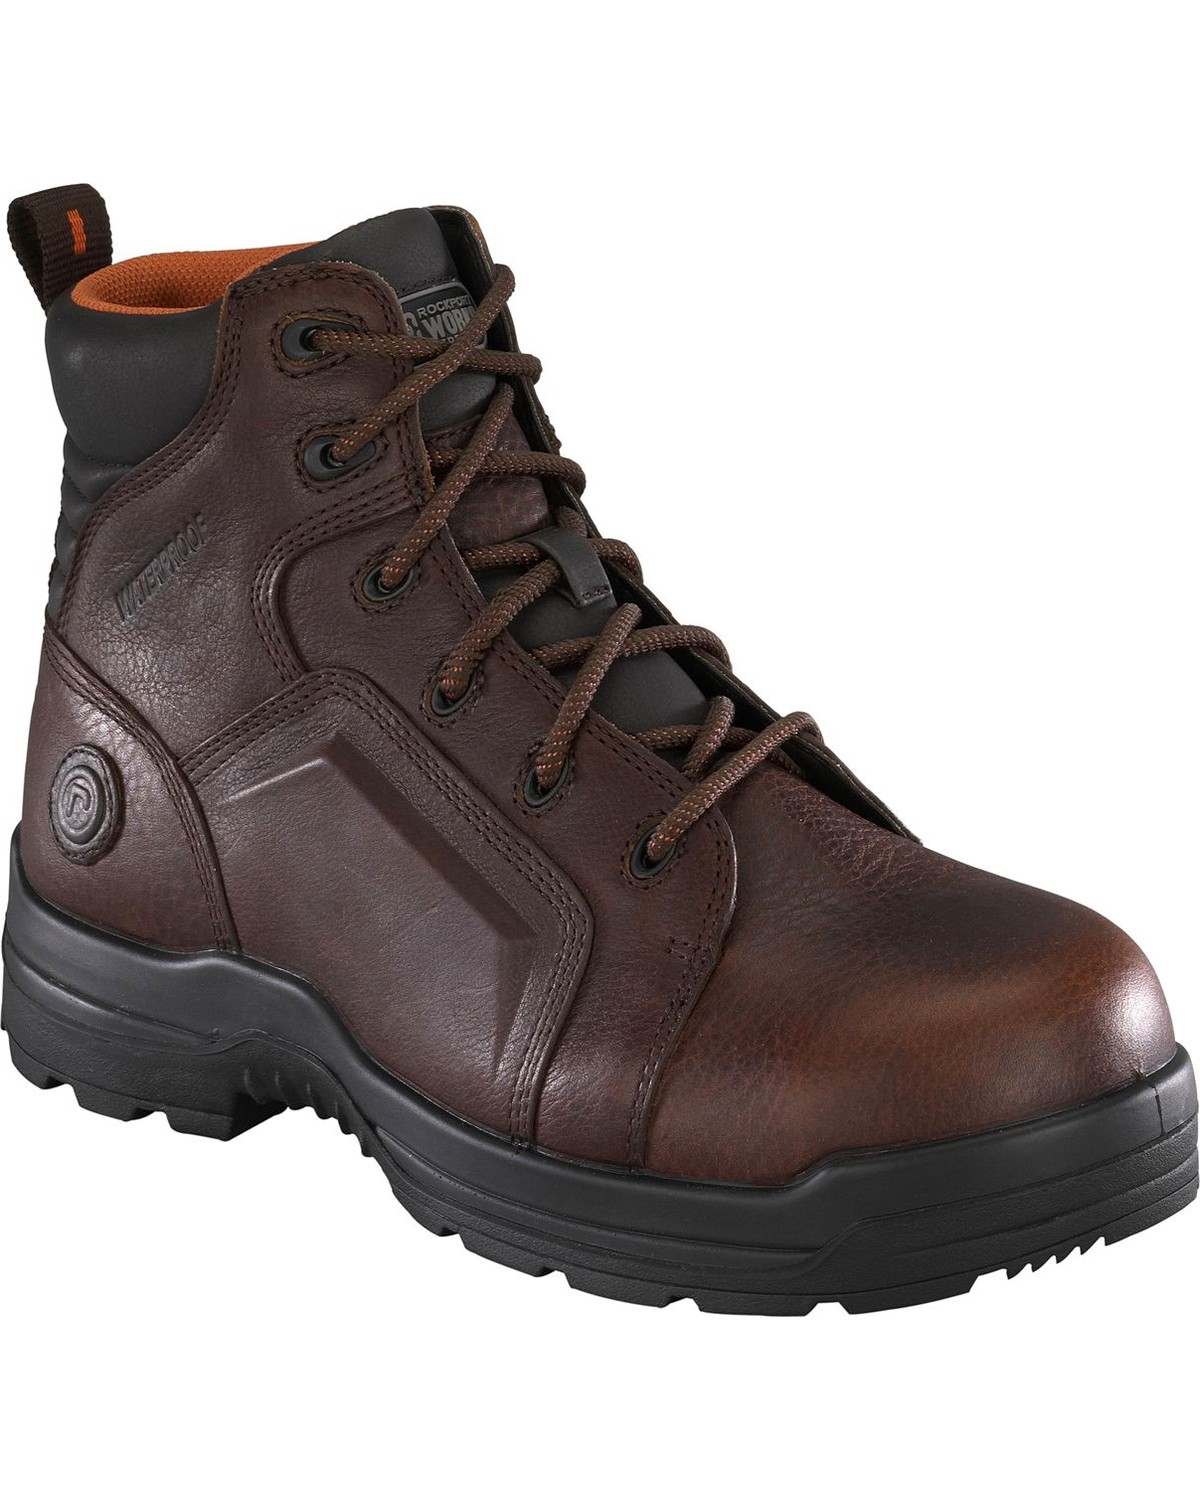 rockport hiking boots women's